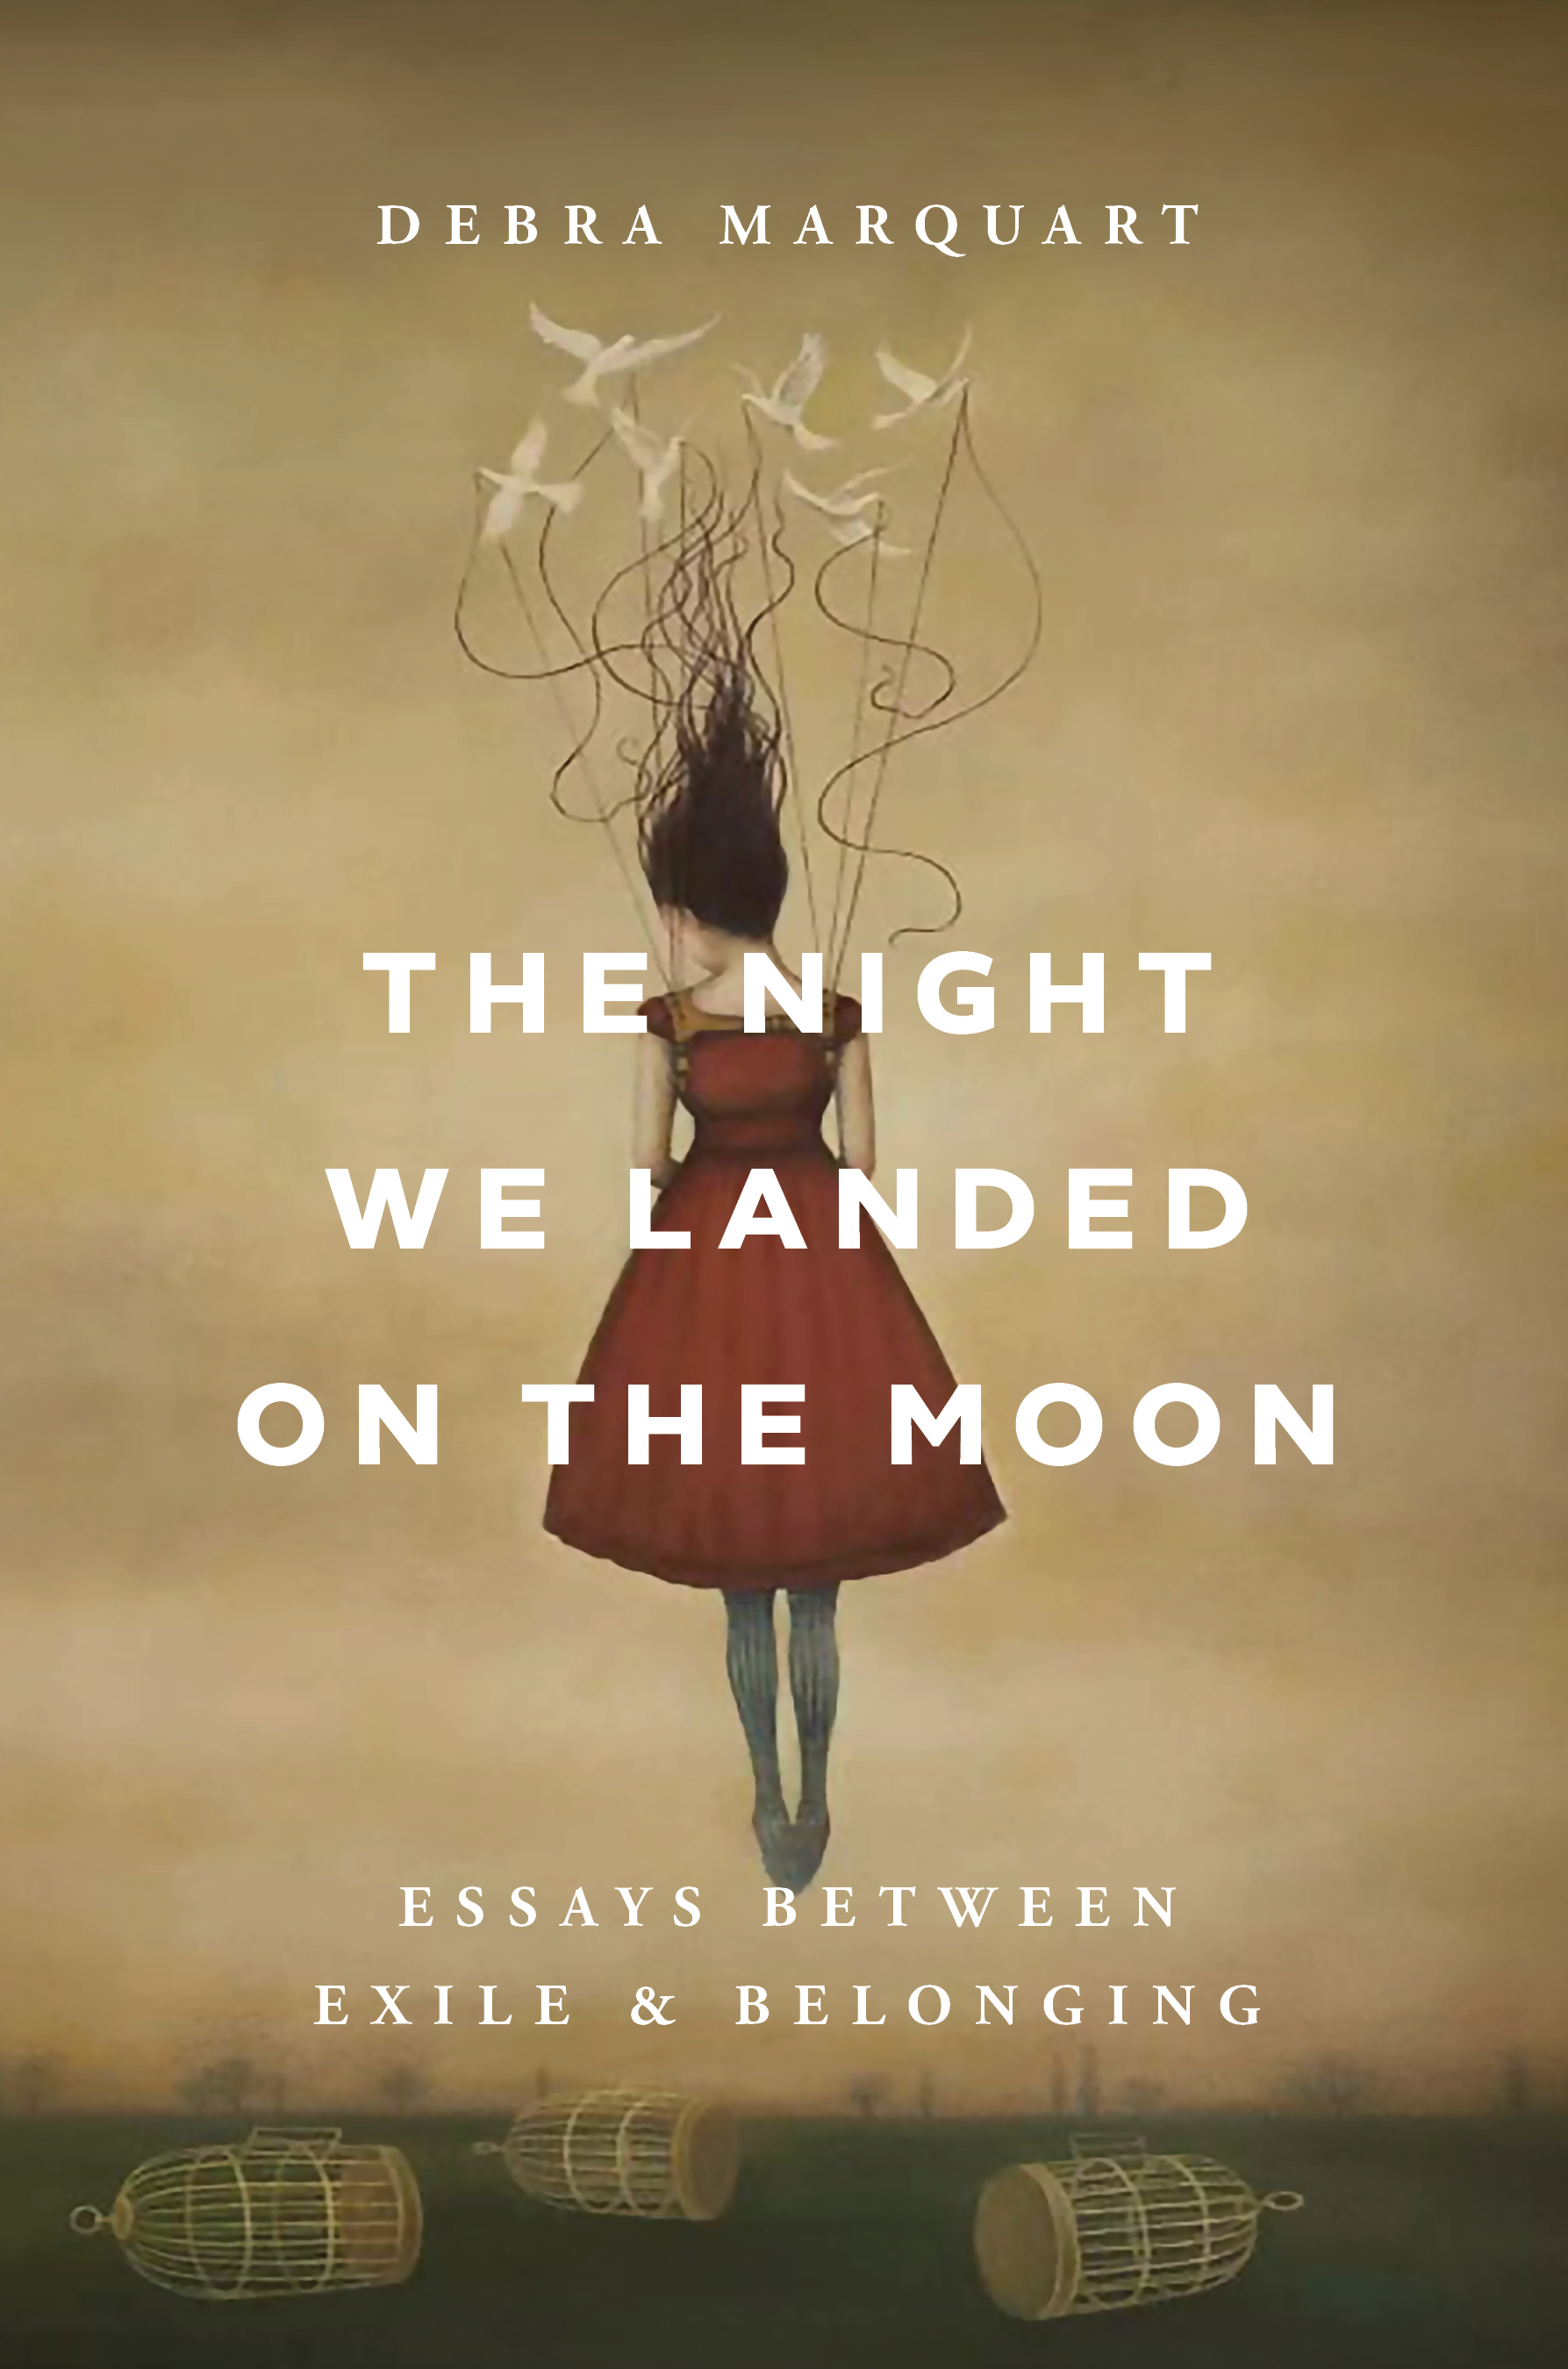 A books cover reads "The Night We Landed on the Moon" with an image of a floating woman in a red dress.